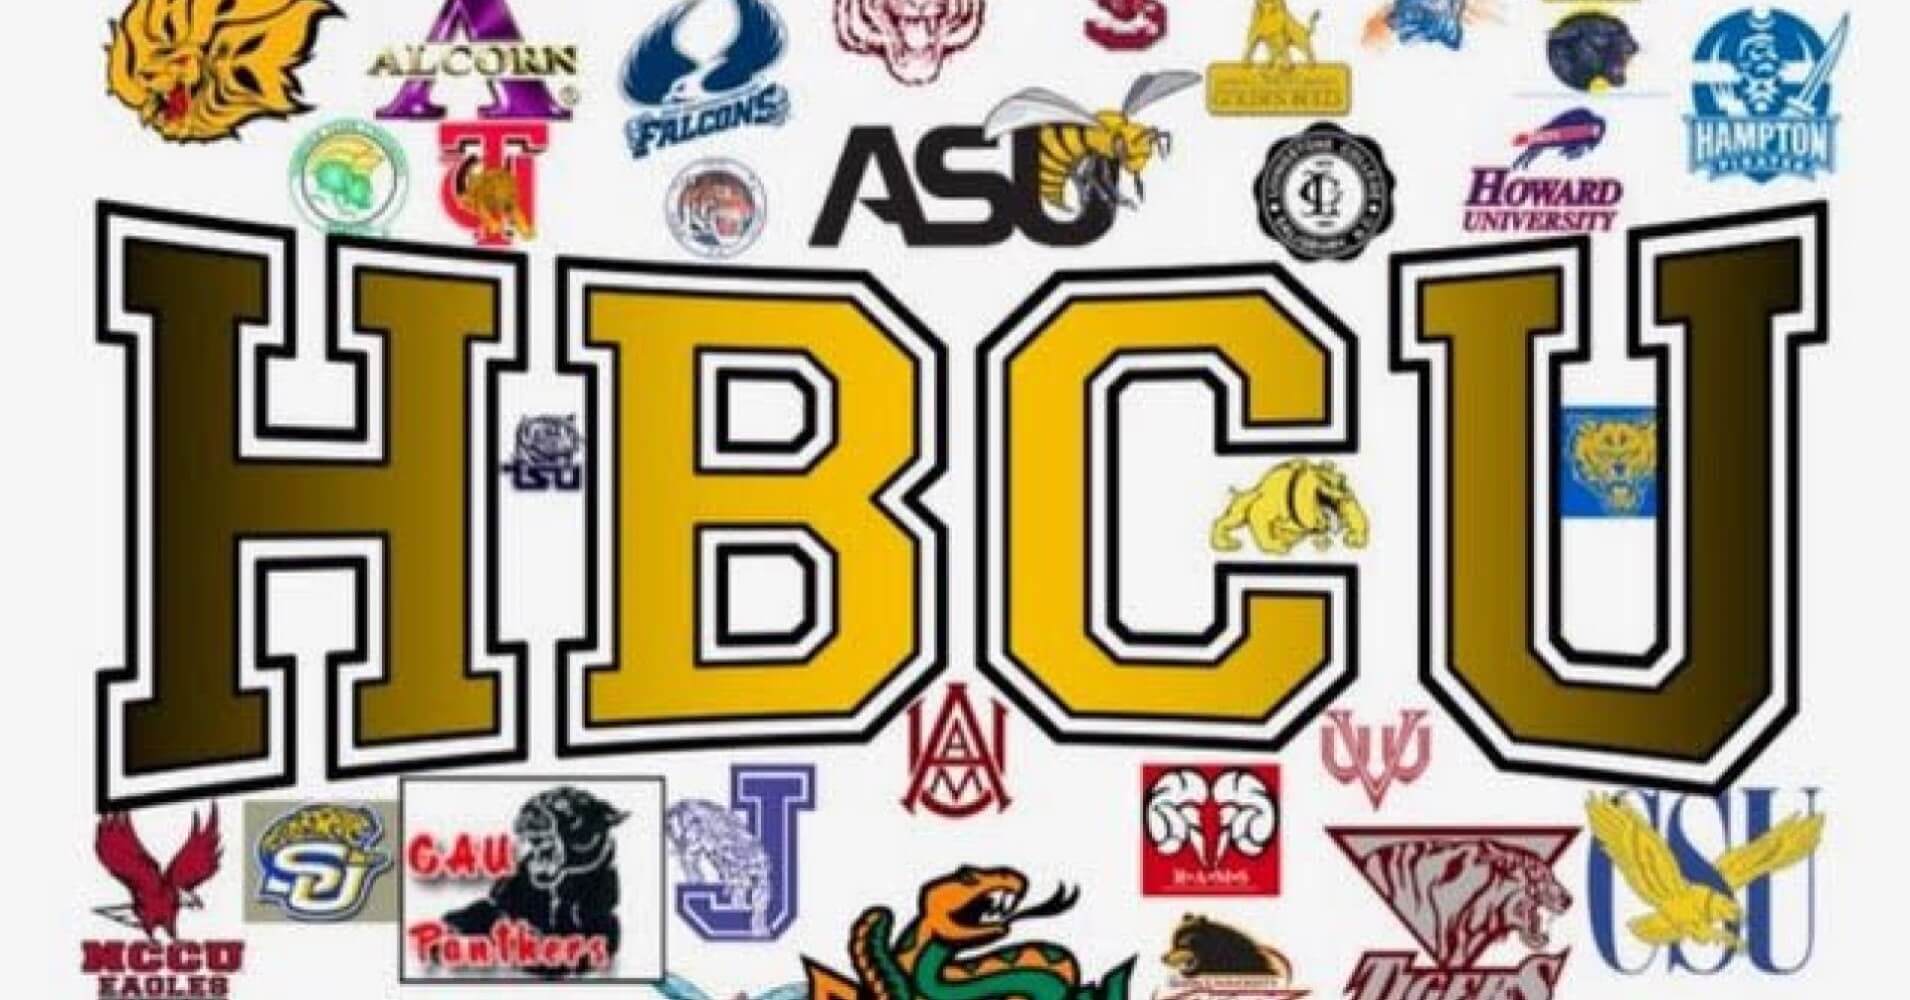 Historically Black Colleges and Universities TechnologySwtich